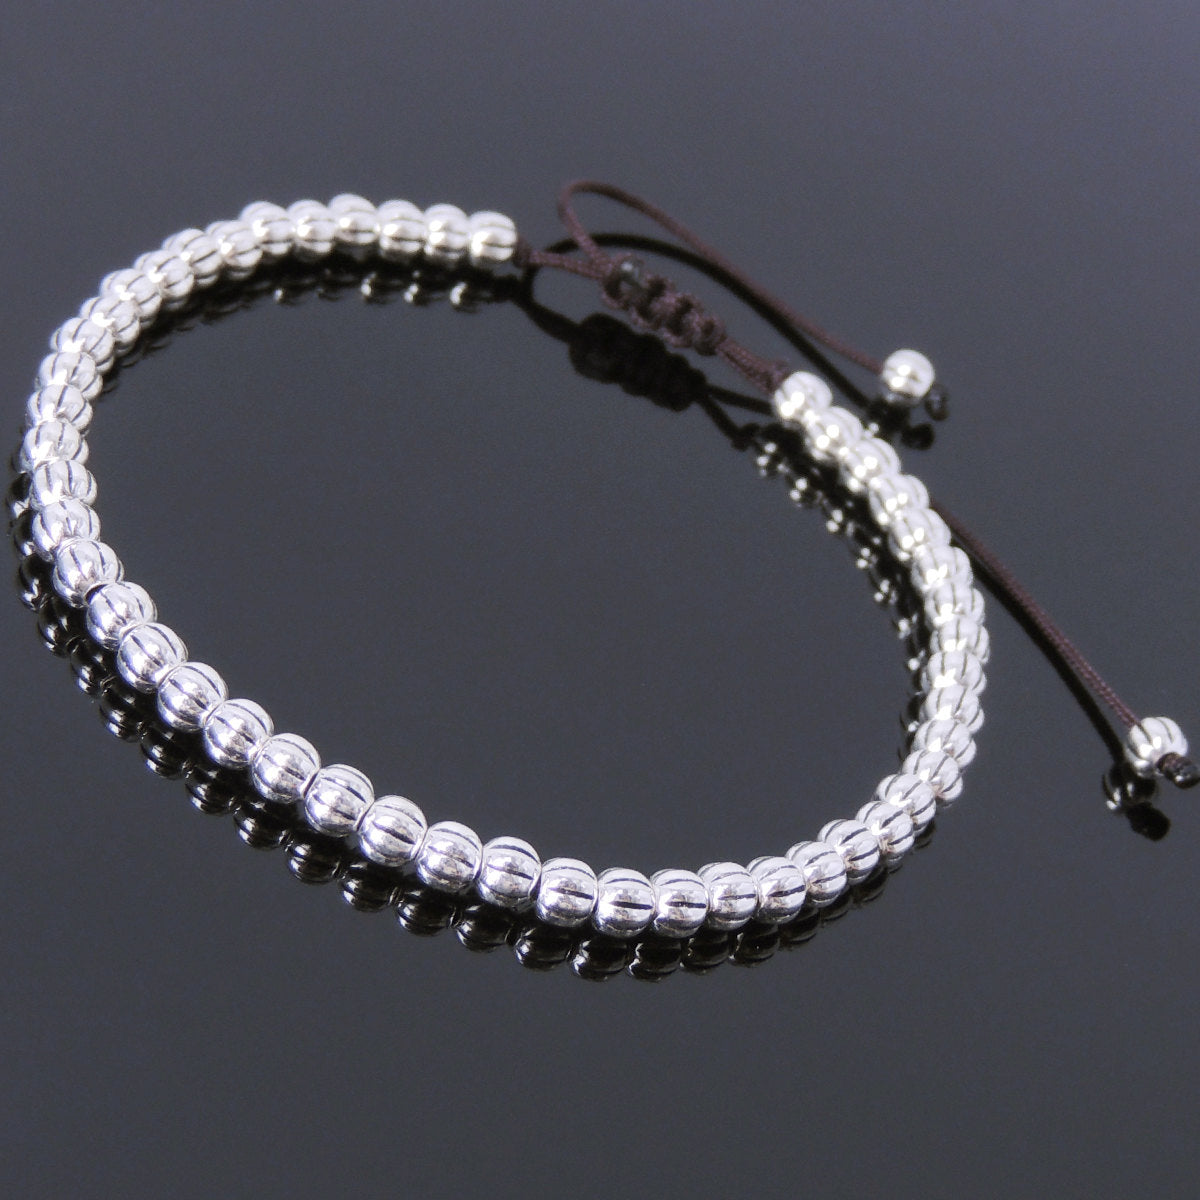 Adjustable Braided Healing Bracelet with S925 Sterling Silver Artisan Beads - Handmade by Gem & Silver BR696